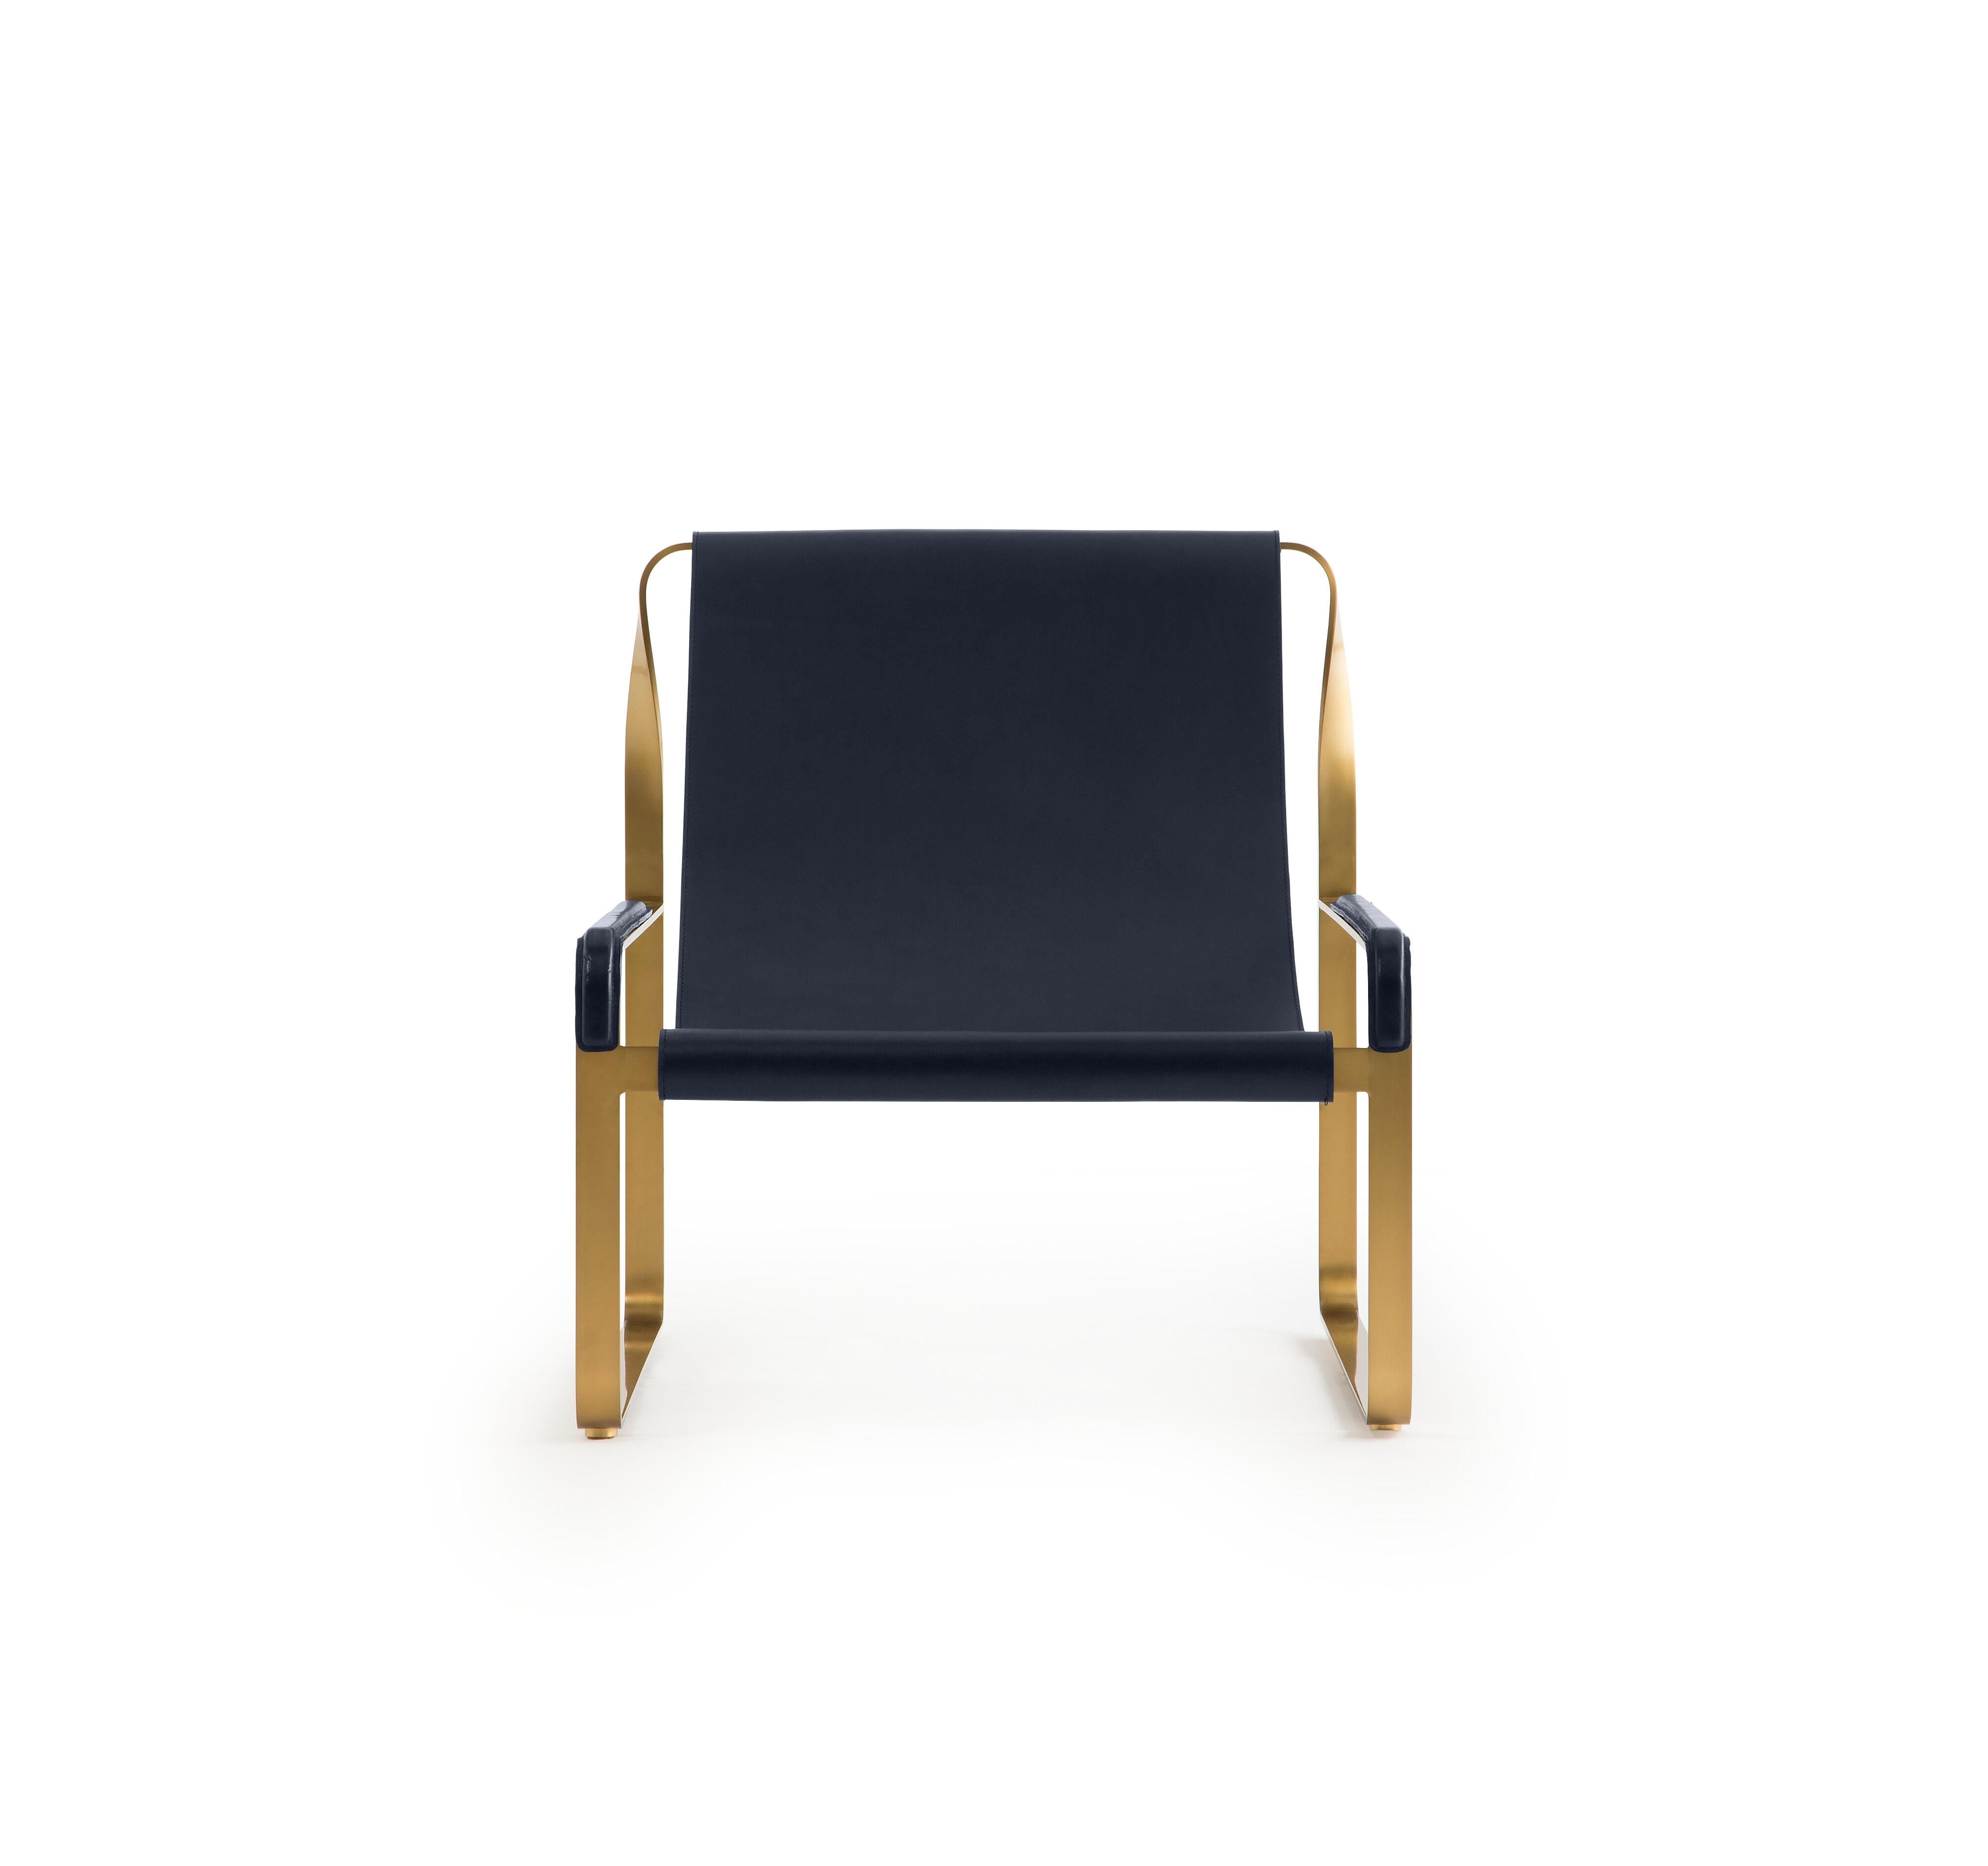 Contemporary style Wanderlust Coll. Chaise longue aged brass steel and navy blue leather.

Serene pieces where exclusivity and precision are shown in small details such as the hand-turned metal nuts and bolts that fix the leather surfaces, that go